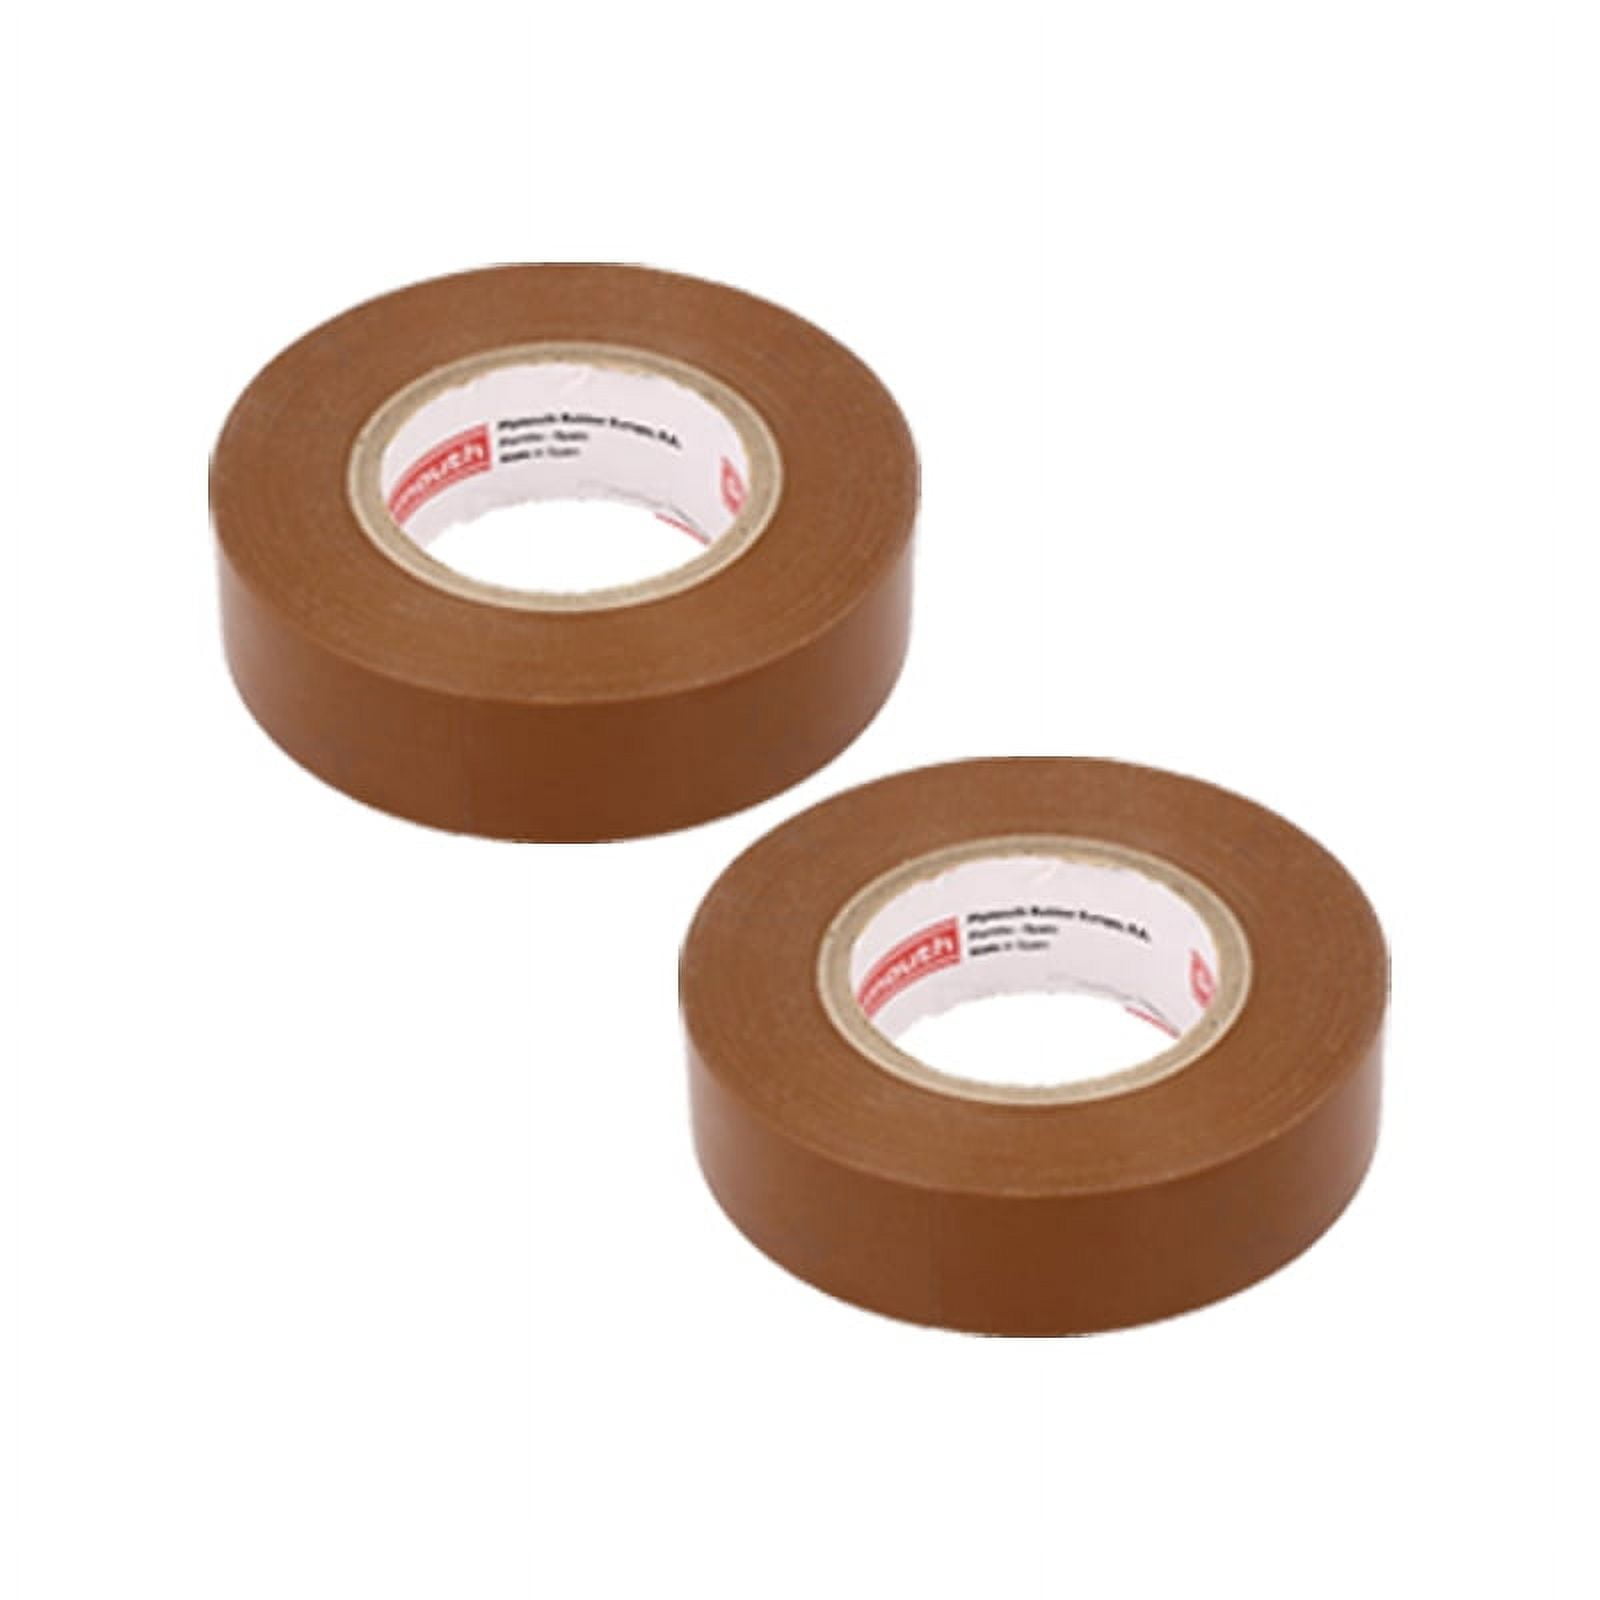 Equate Cloth Tape, 2 Count 